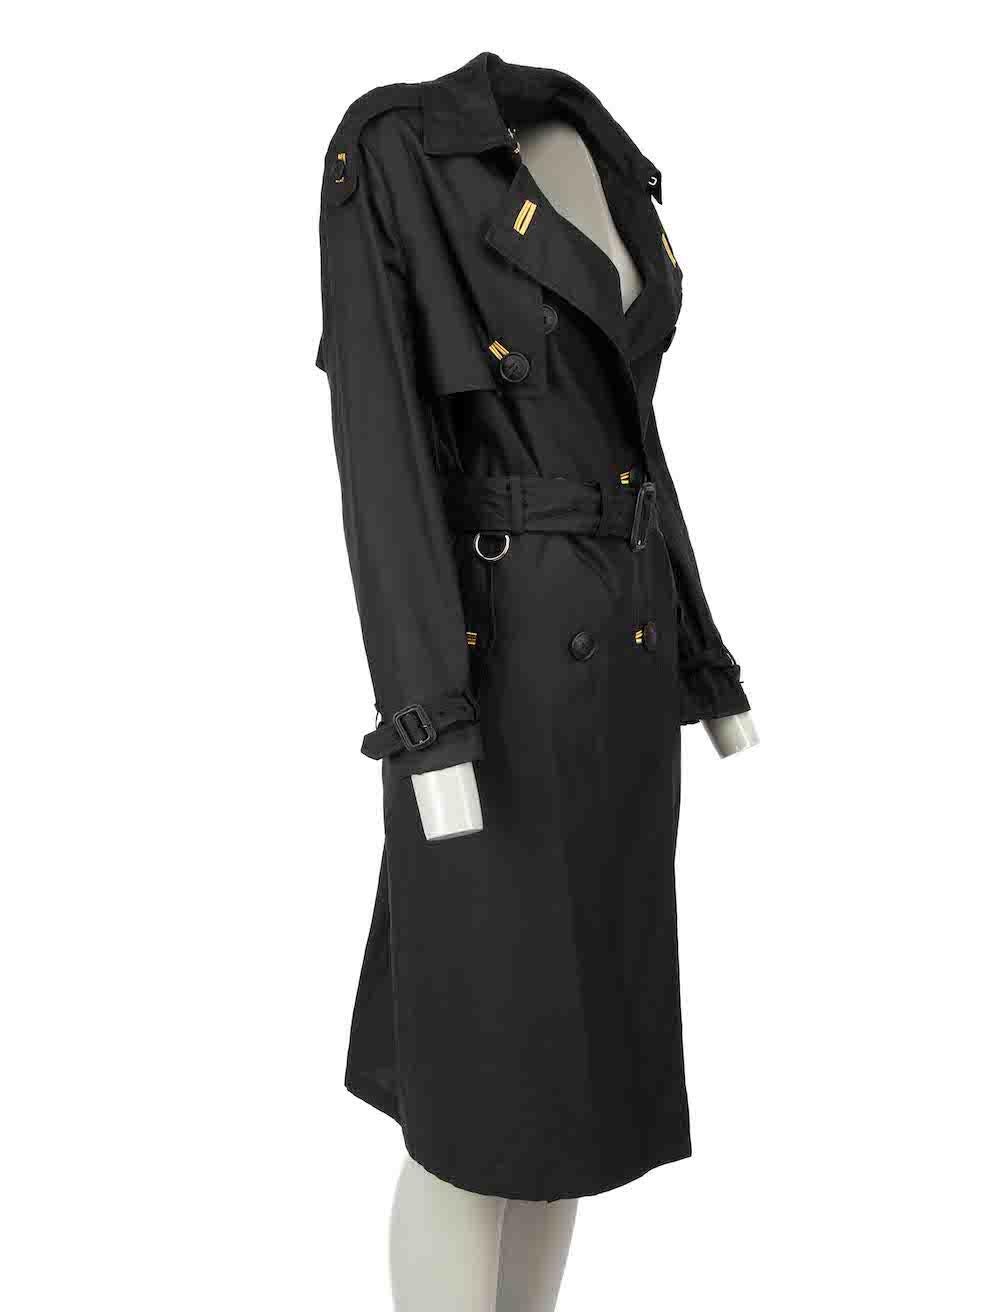 CONDITION is Very good. Hardly any visible wear to coat is evident on this used Burberry Prorsum designer resale item.
  
Details
Black
Silk
Double breasted coat
Button up fastening
Gold button hole detail
Buckle cuffs
Waist belt
2x Side pockets
 